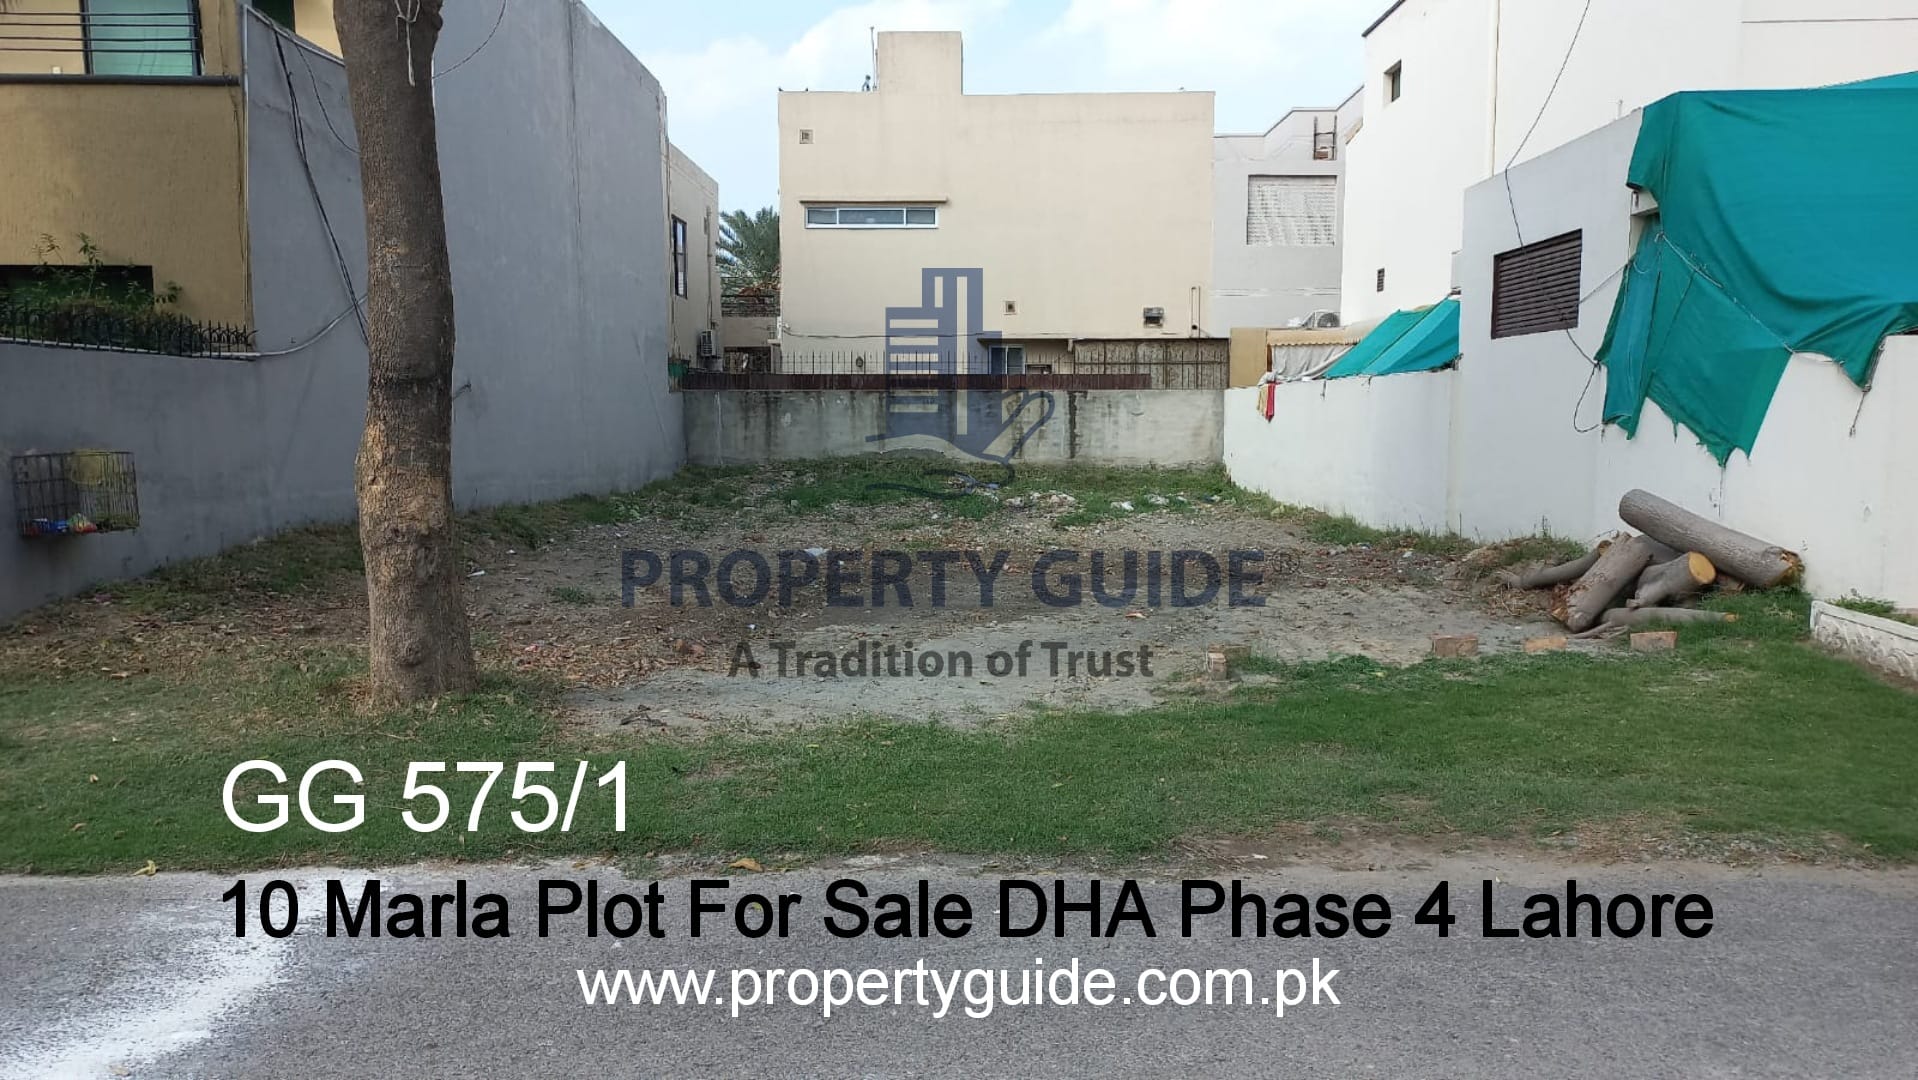 10 marla plot for sale near market in DHA Phase 4 Lahore